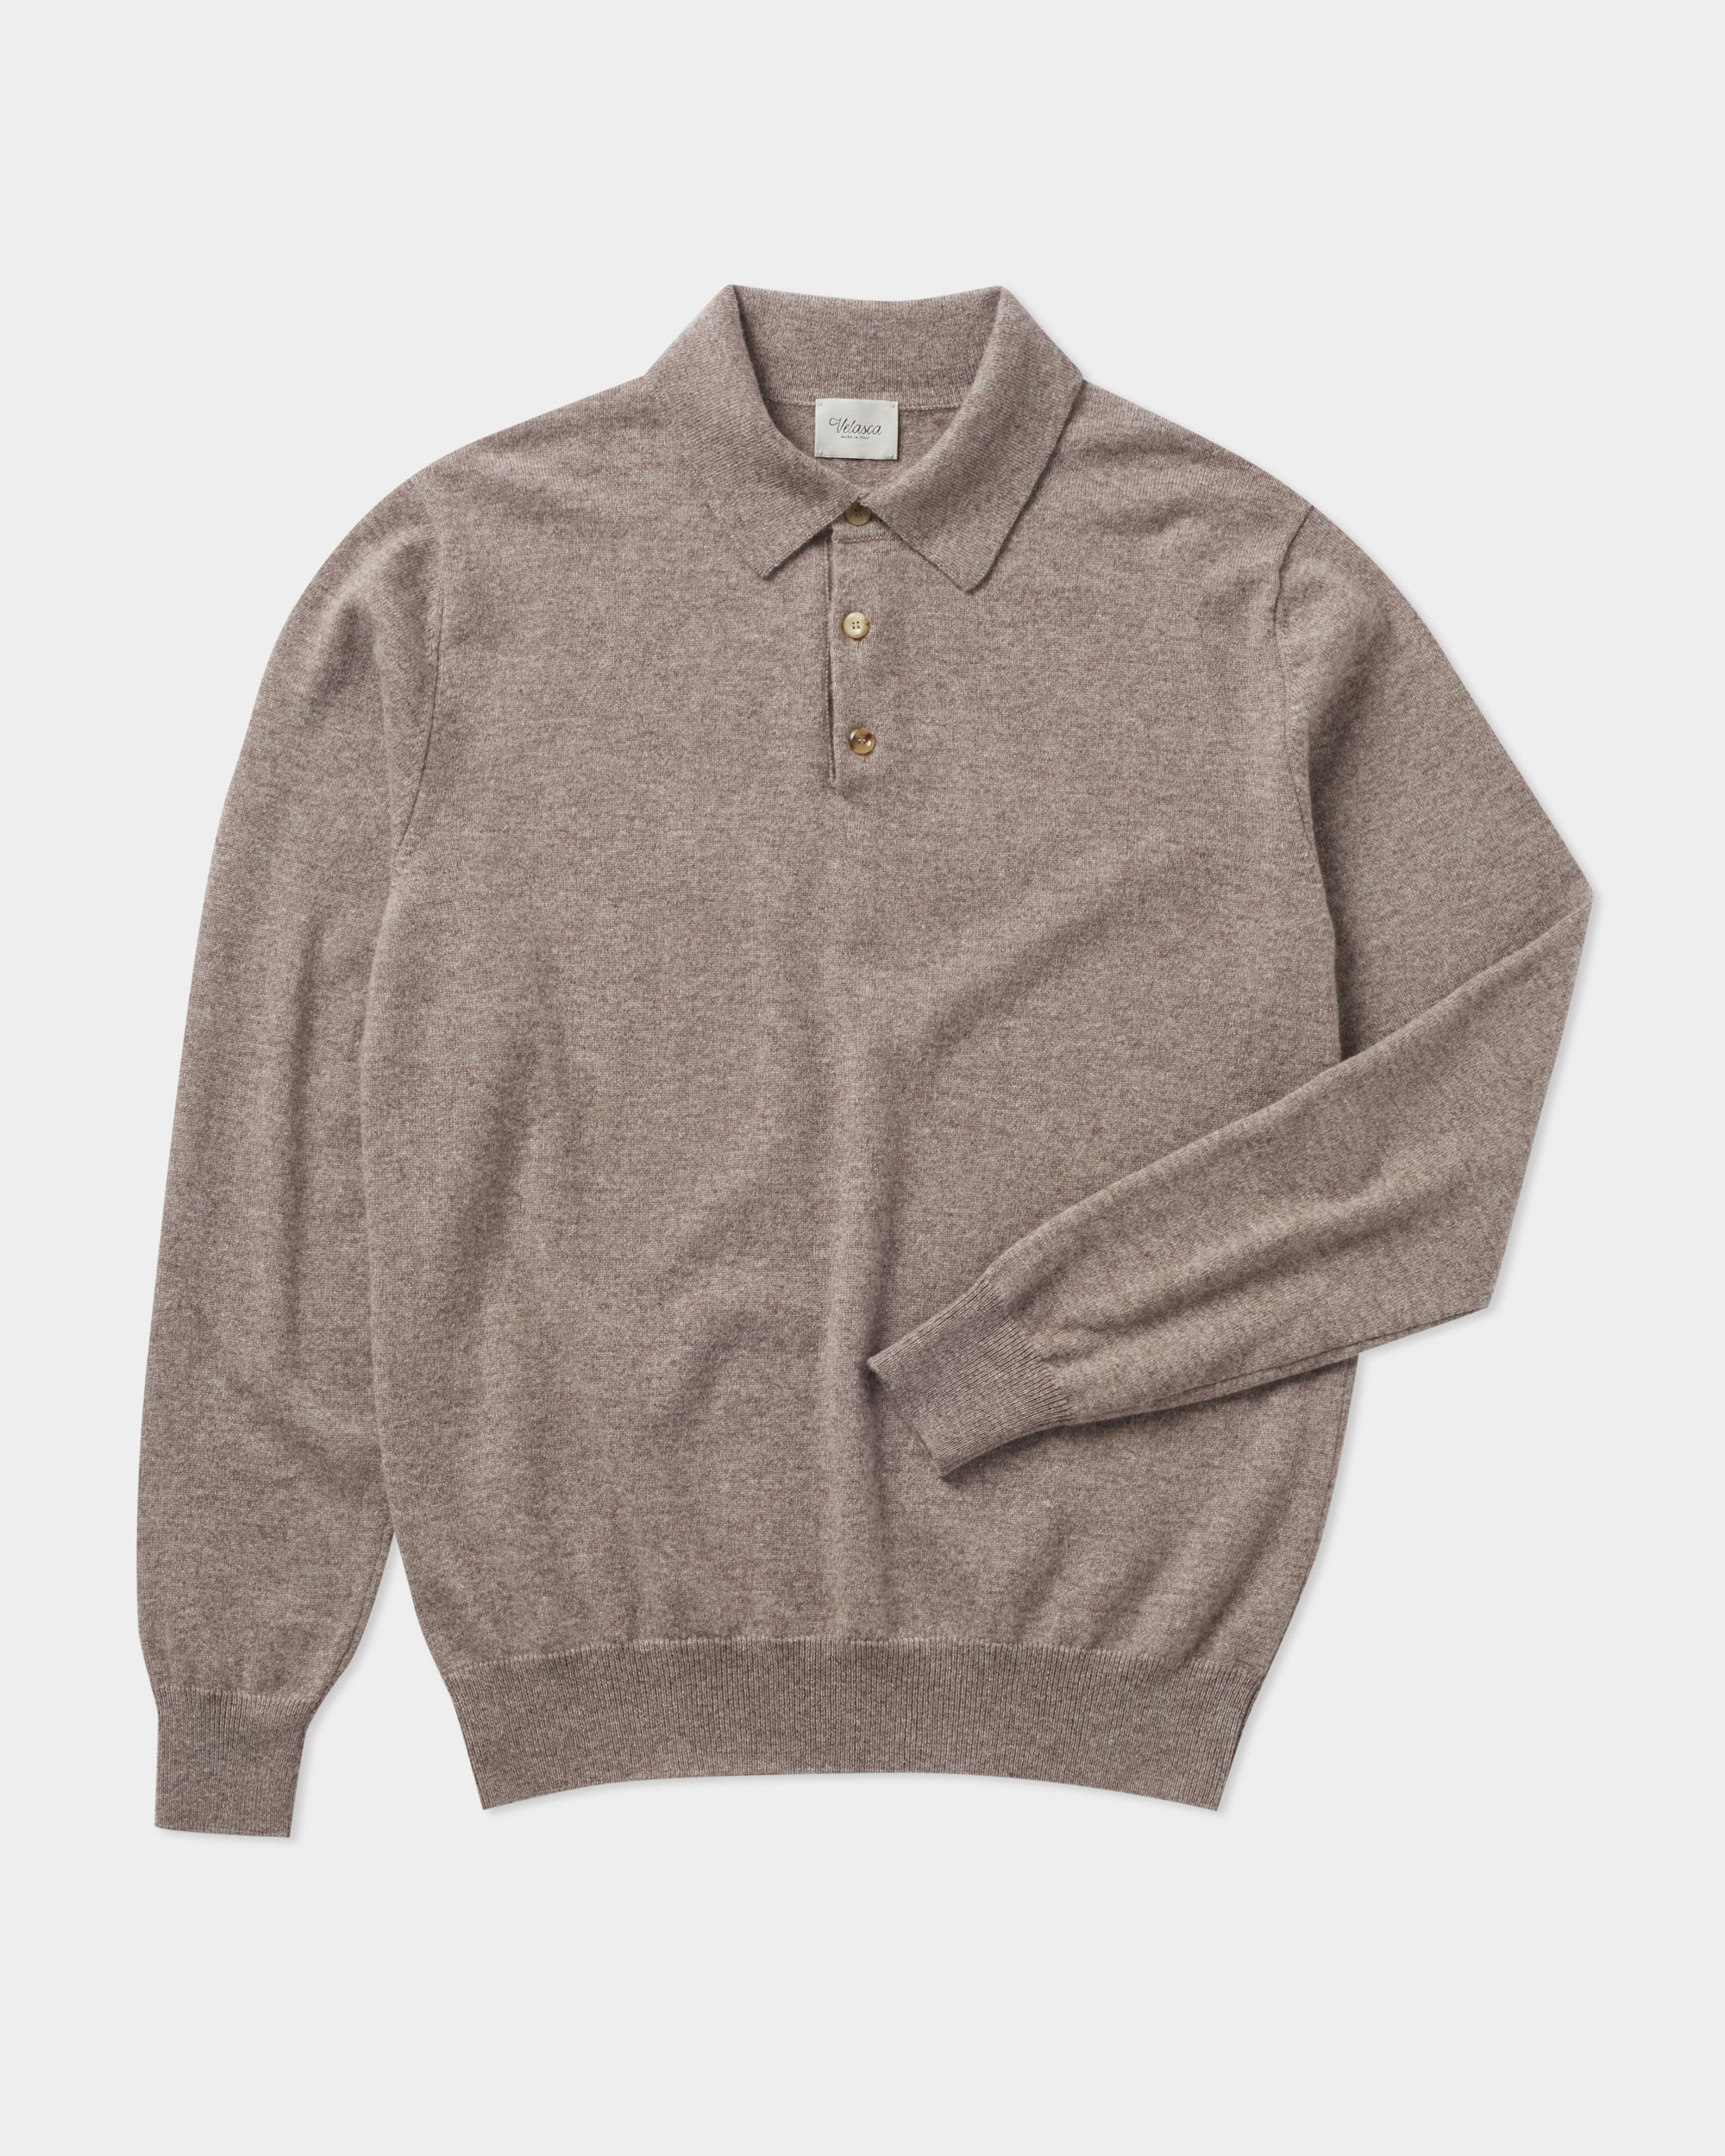 Velasca | Beige long-sleeved cashmere polo, Made in Italy